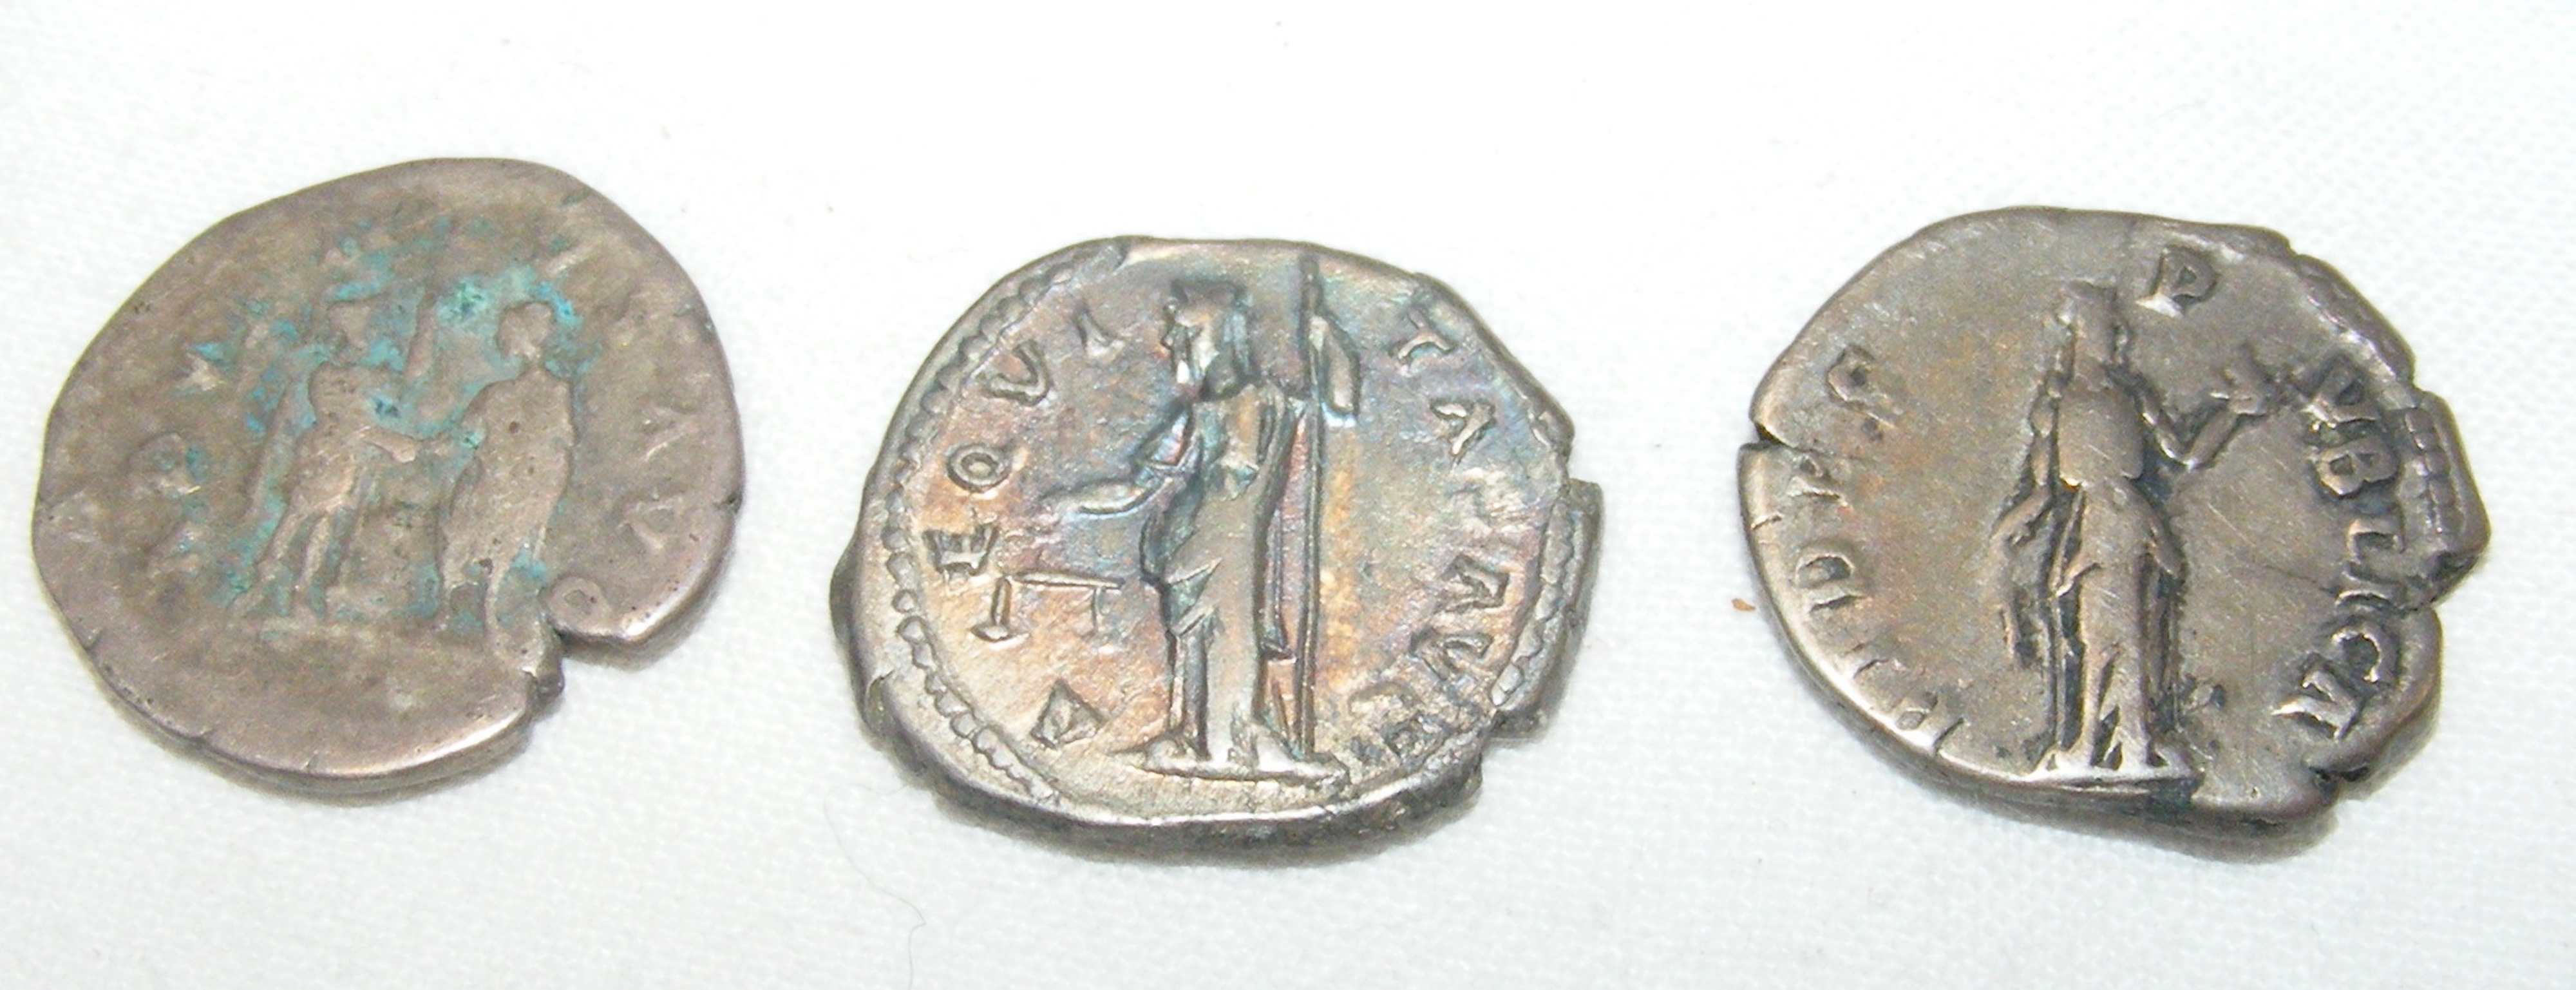 Three Roman silver coins, Hadrian (AD117-138) - each approx. 2. - Image 2 of 2